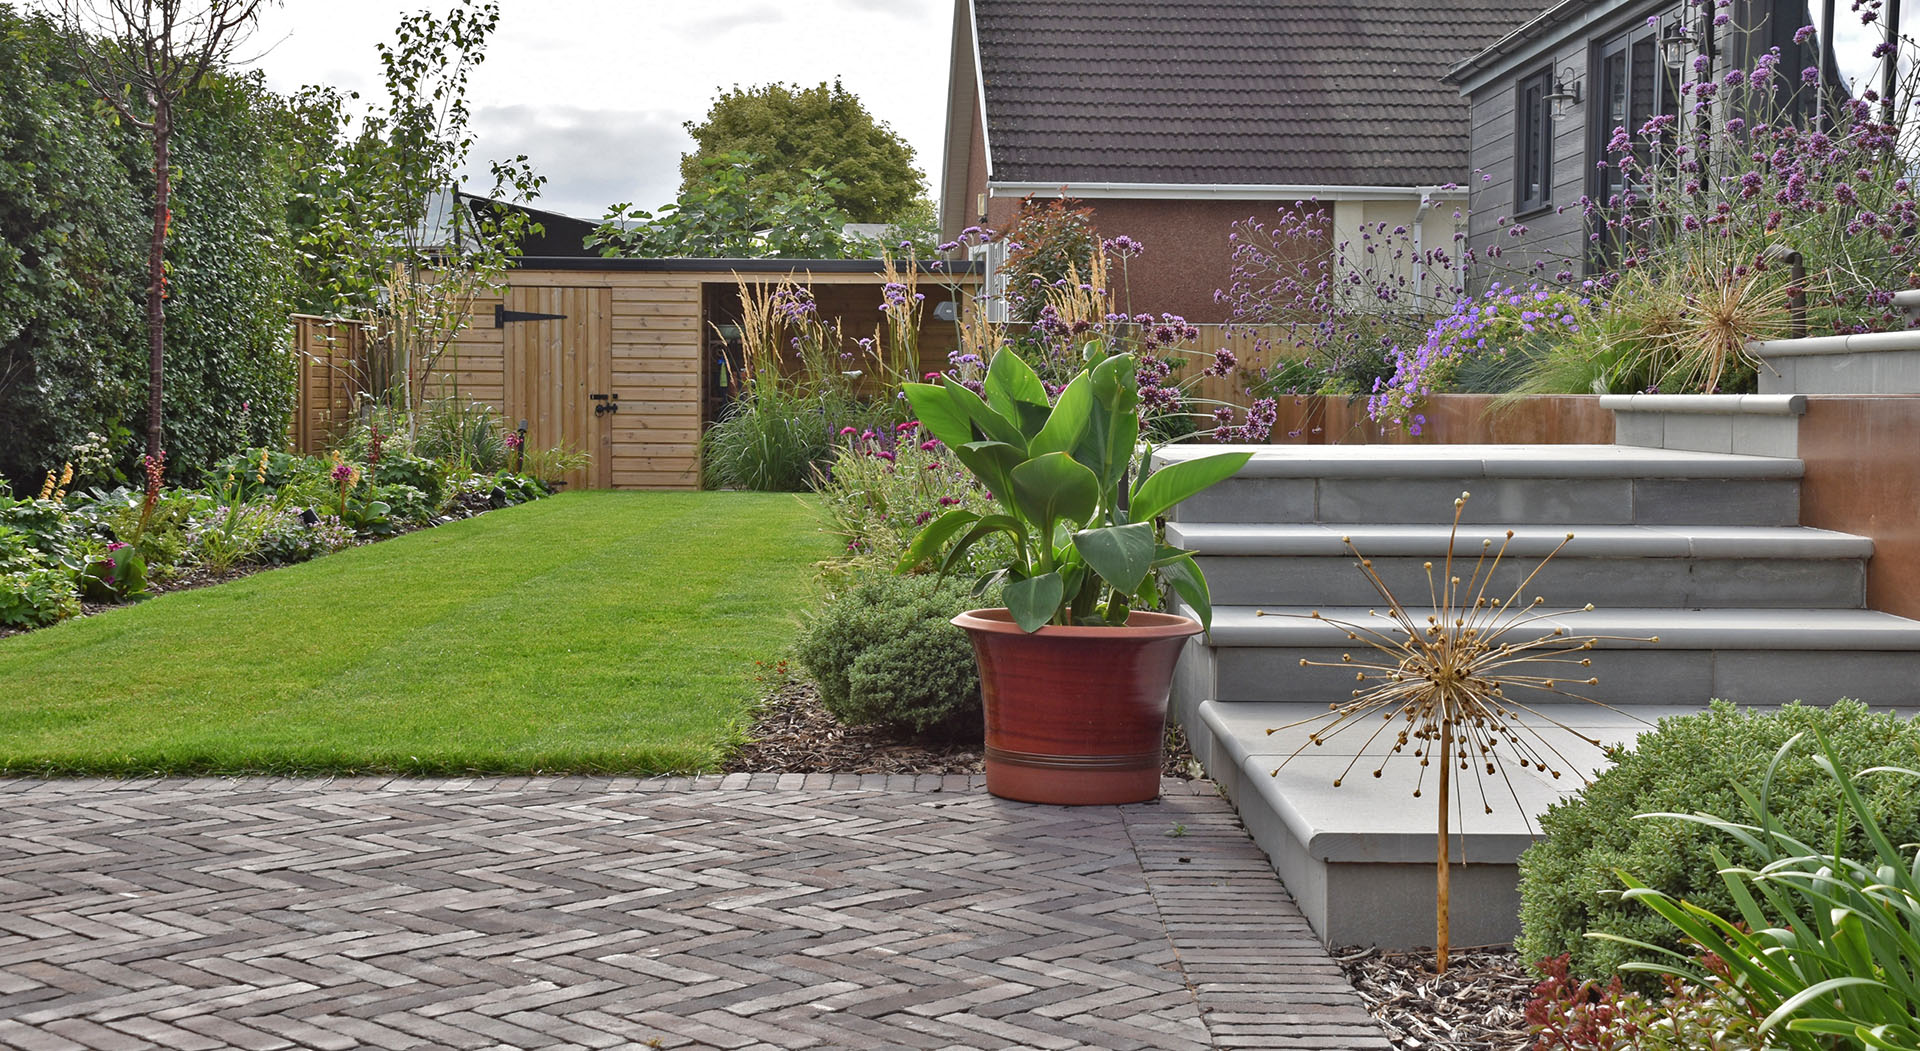 Clay pavers and lawn - Garden design and Landscaping in Abergavenny